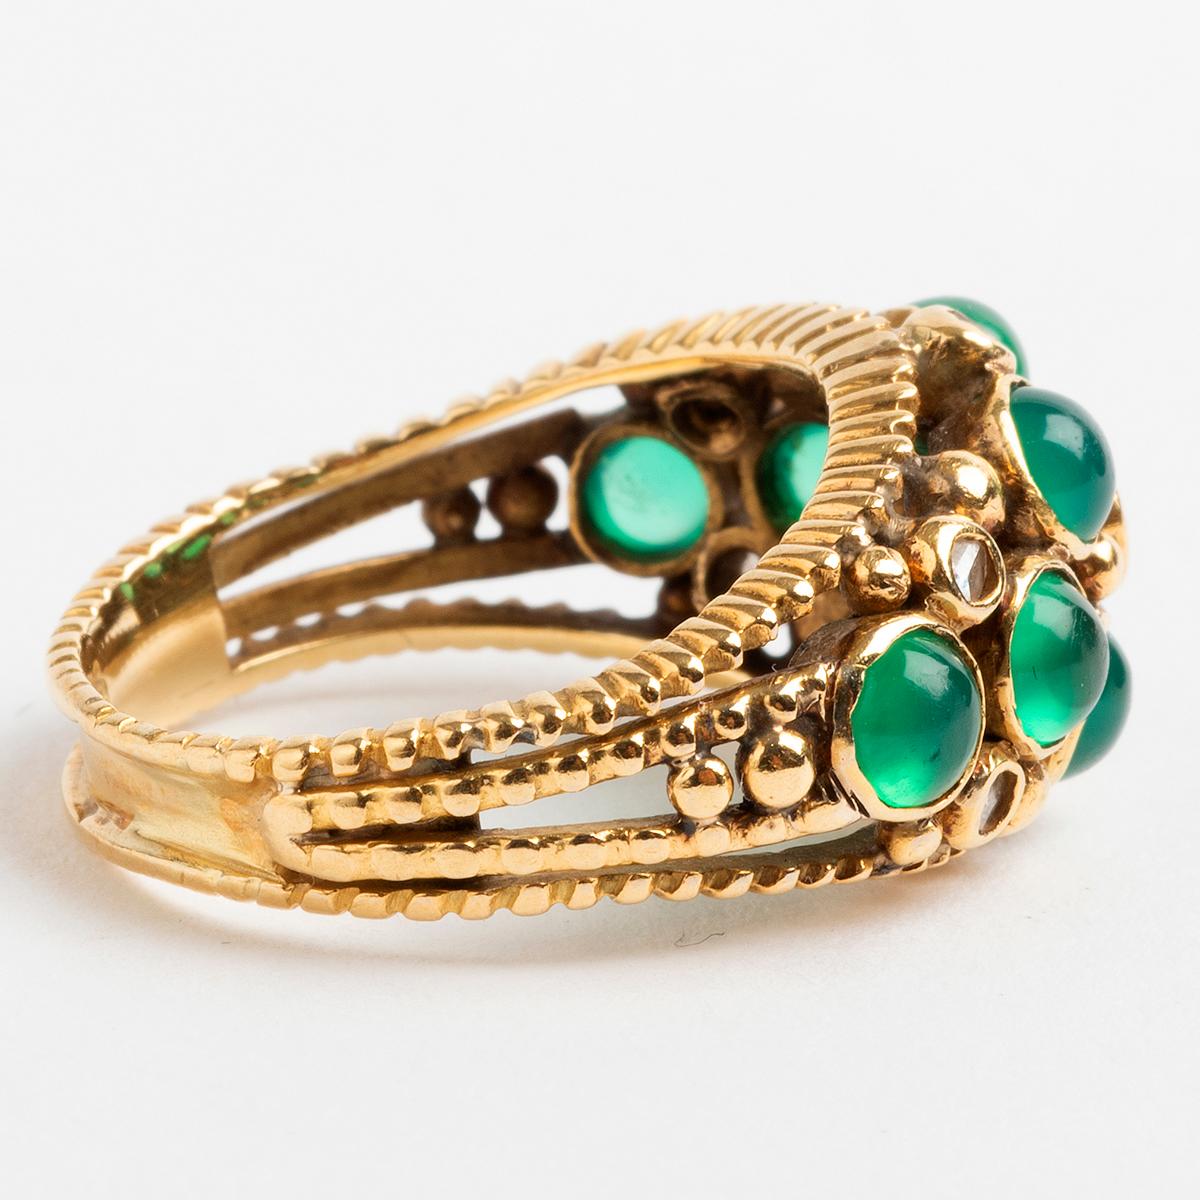 A vintage emerald and diamond dress ring, set in 18k yellow gold with a decorative bead effect shank, our prominent continental ring is hallmarked for import and dates from circa 1960s. The stones cover 2.3cm x 1cm and stand 7mm high. This ring is a